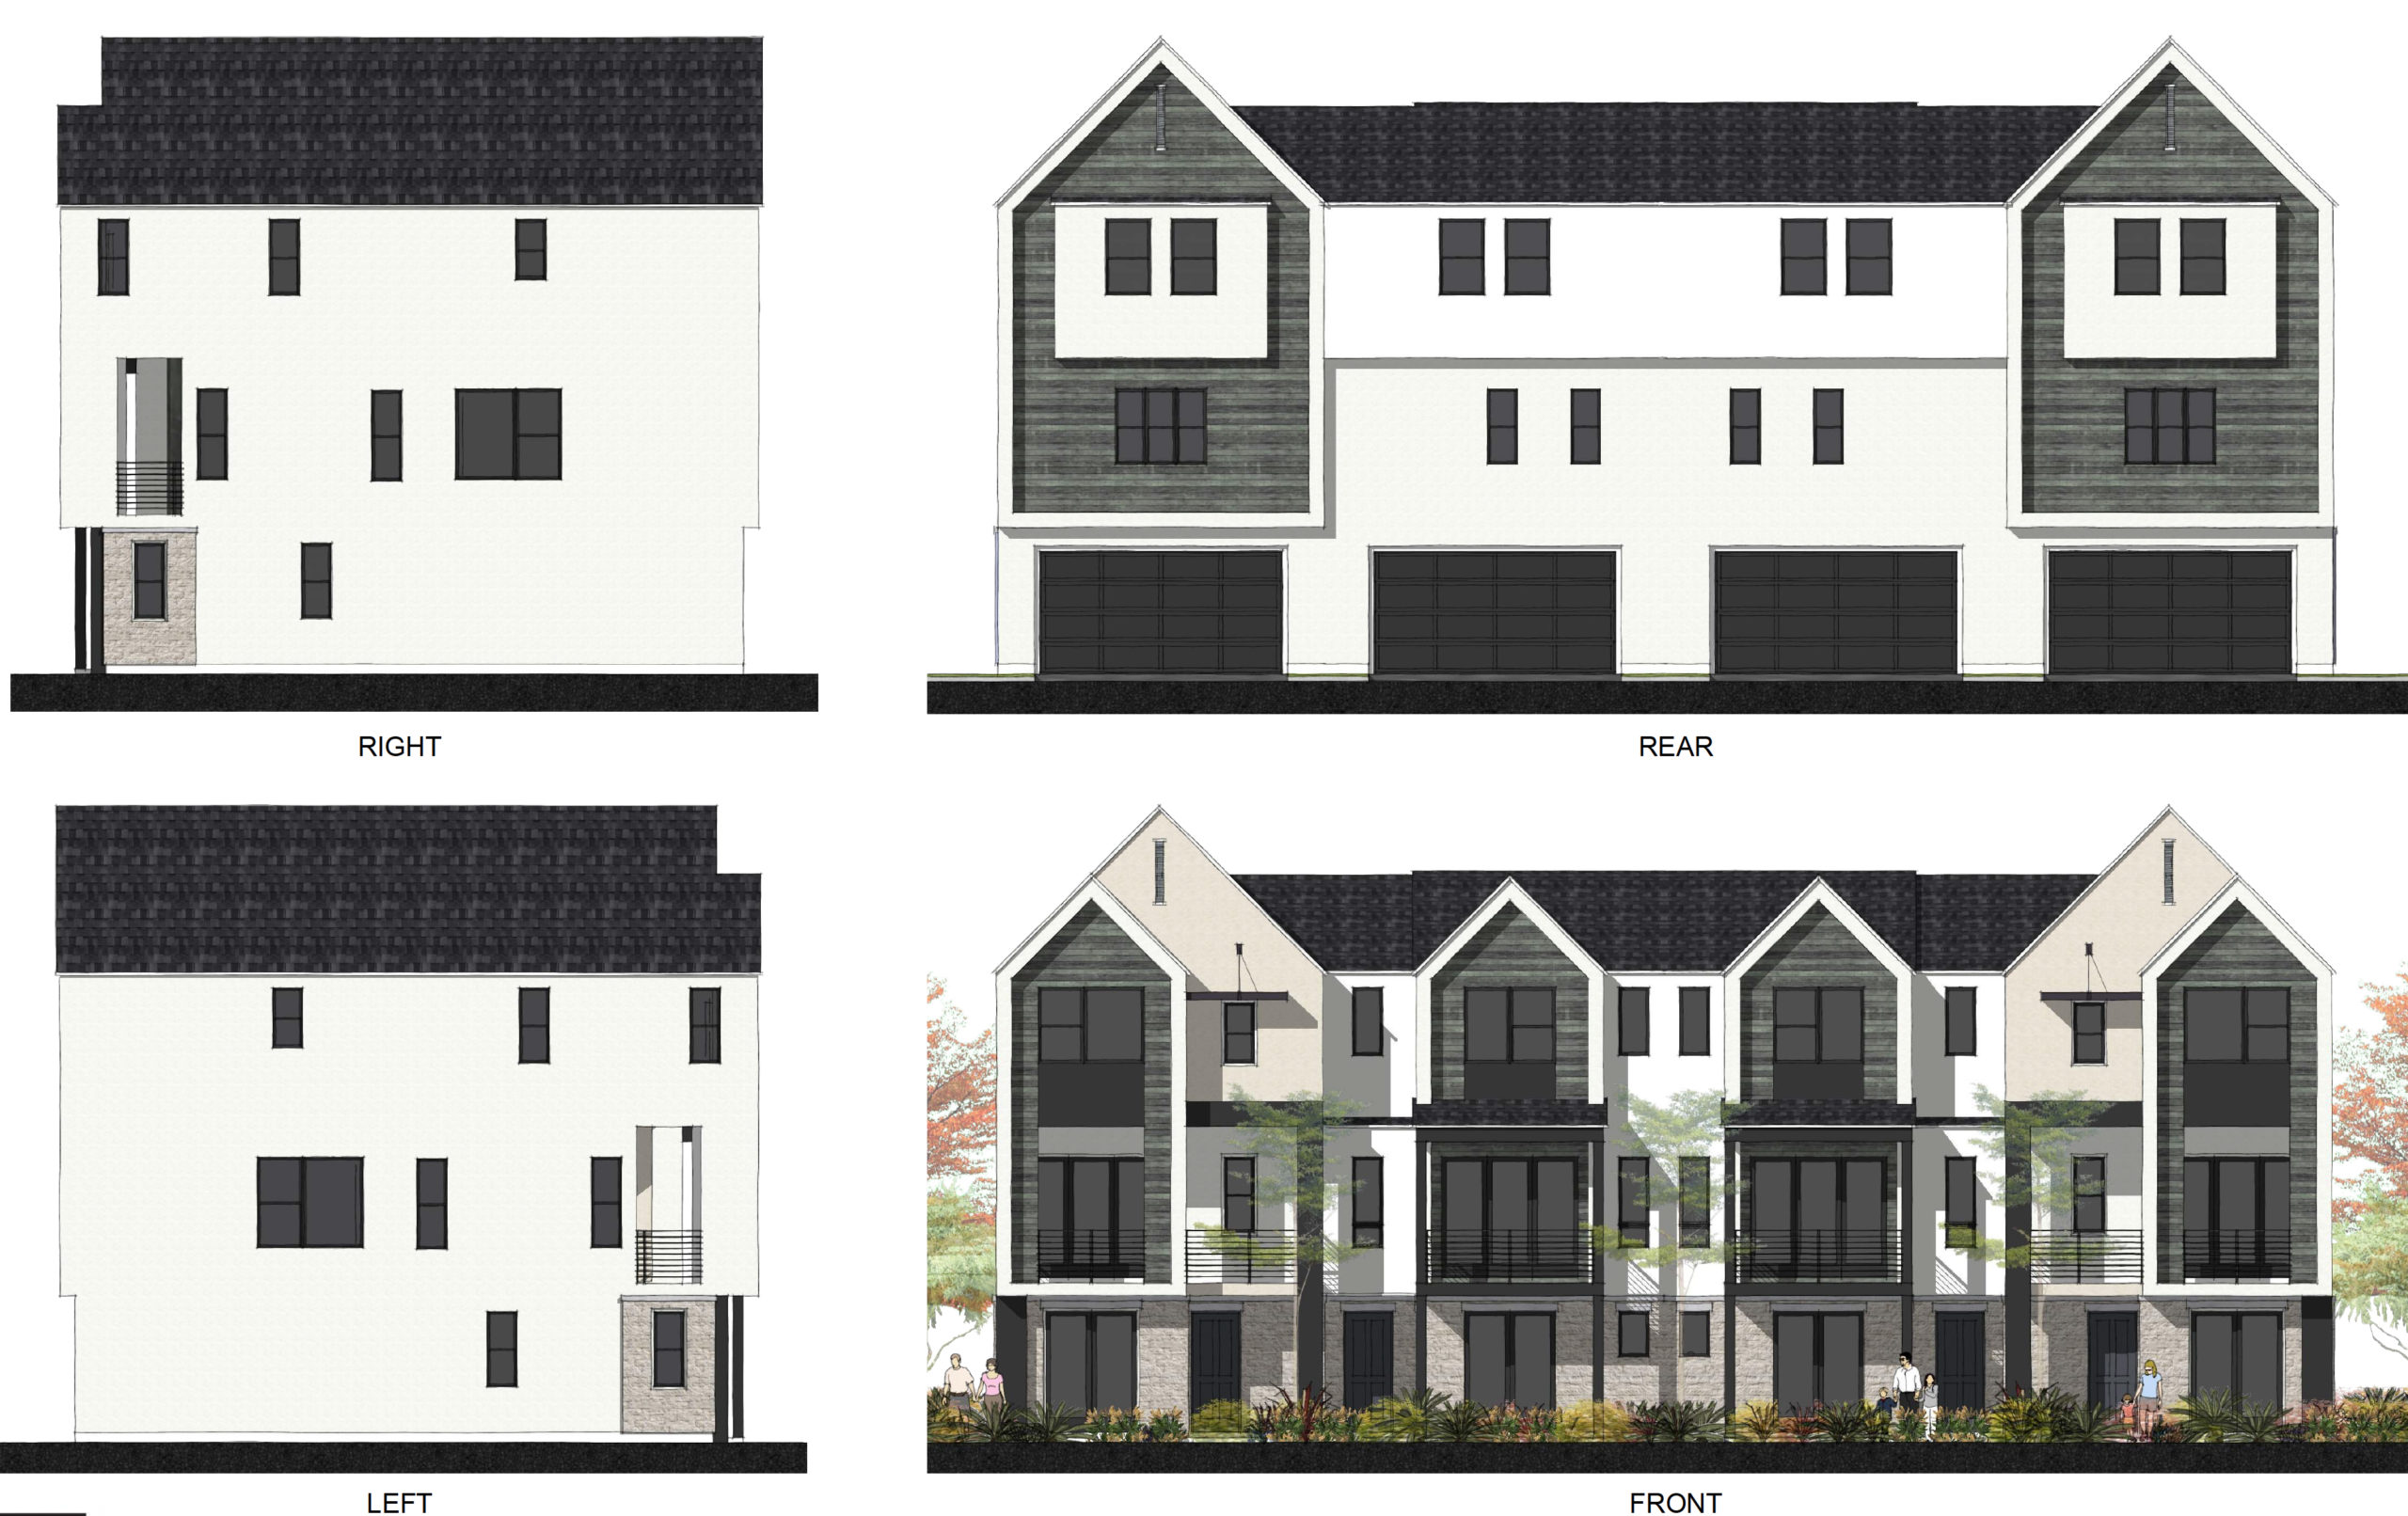 707 Commons Drive quadplex elevations, rendering by BSB Design